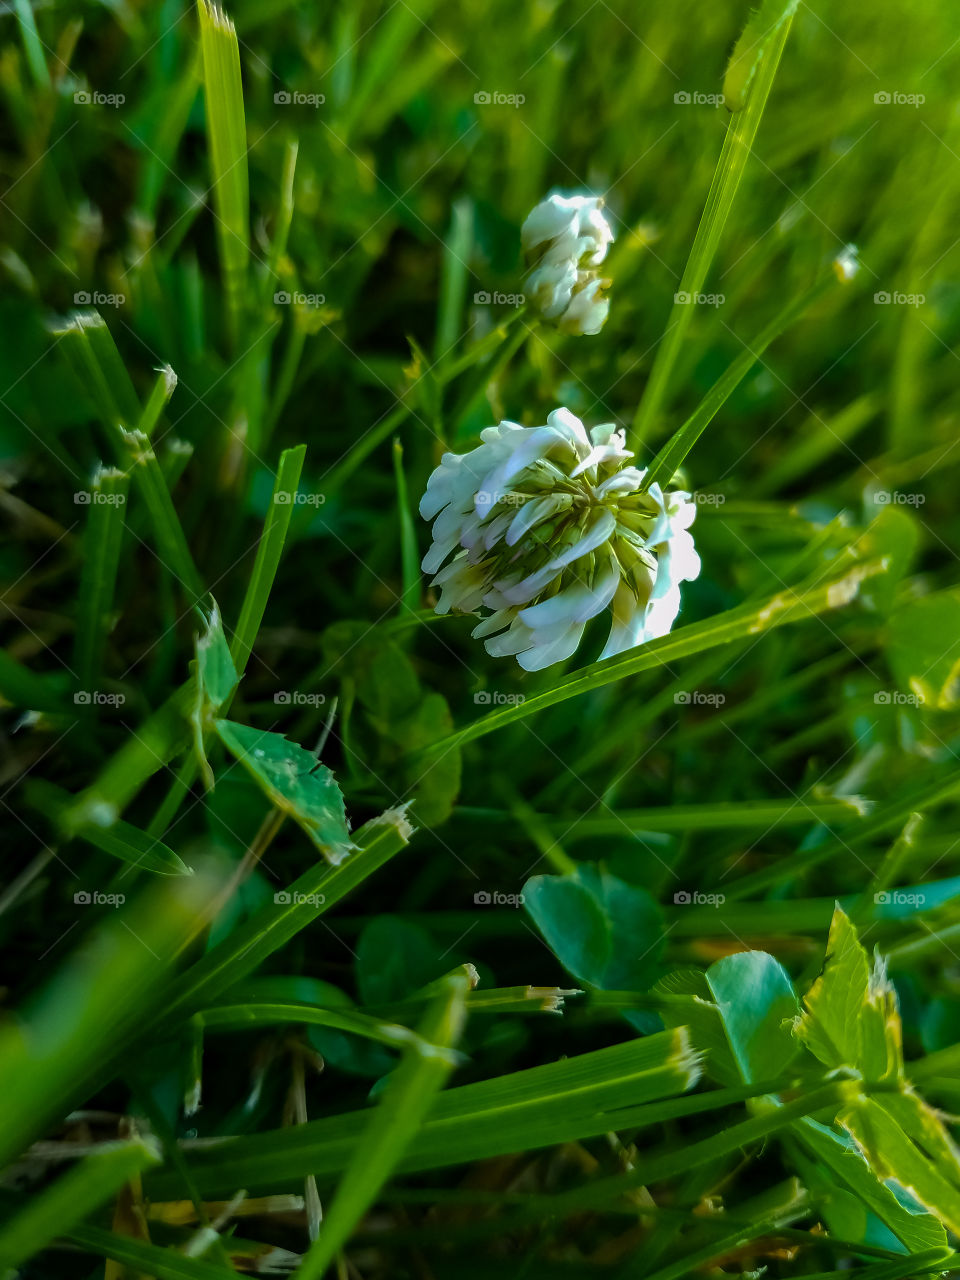 Clover in the Grass